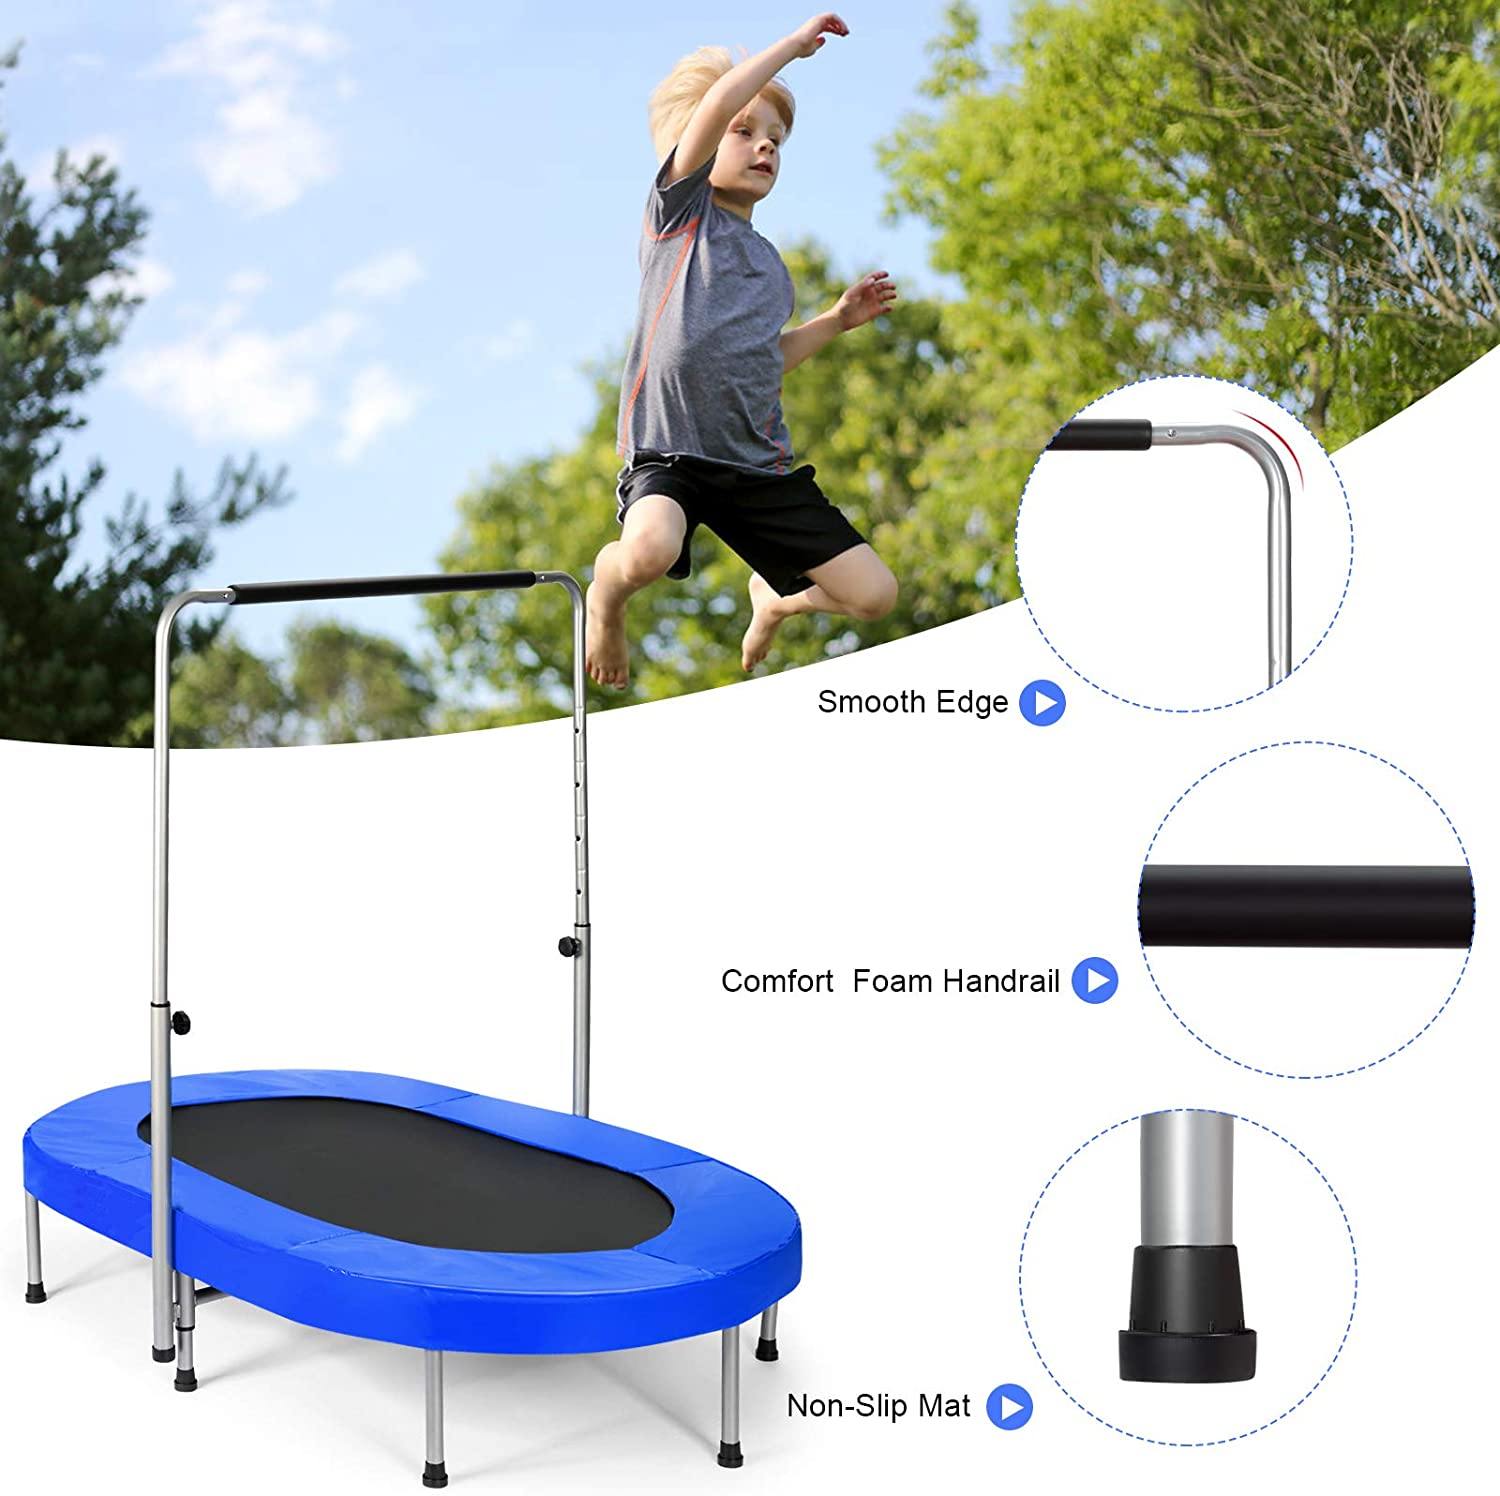 Mini Trampoline, 2 Persons Foldable Fitness Trampoline w/ 5 Levels Height Adjustable Handle, Max Load 330LBS - Giantexus